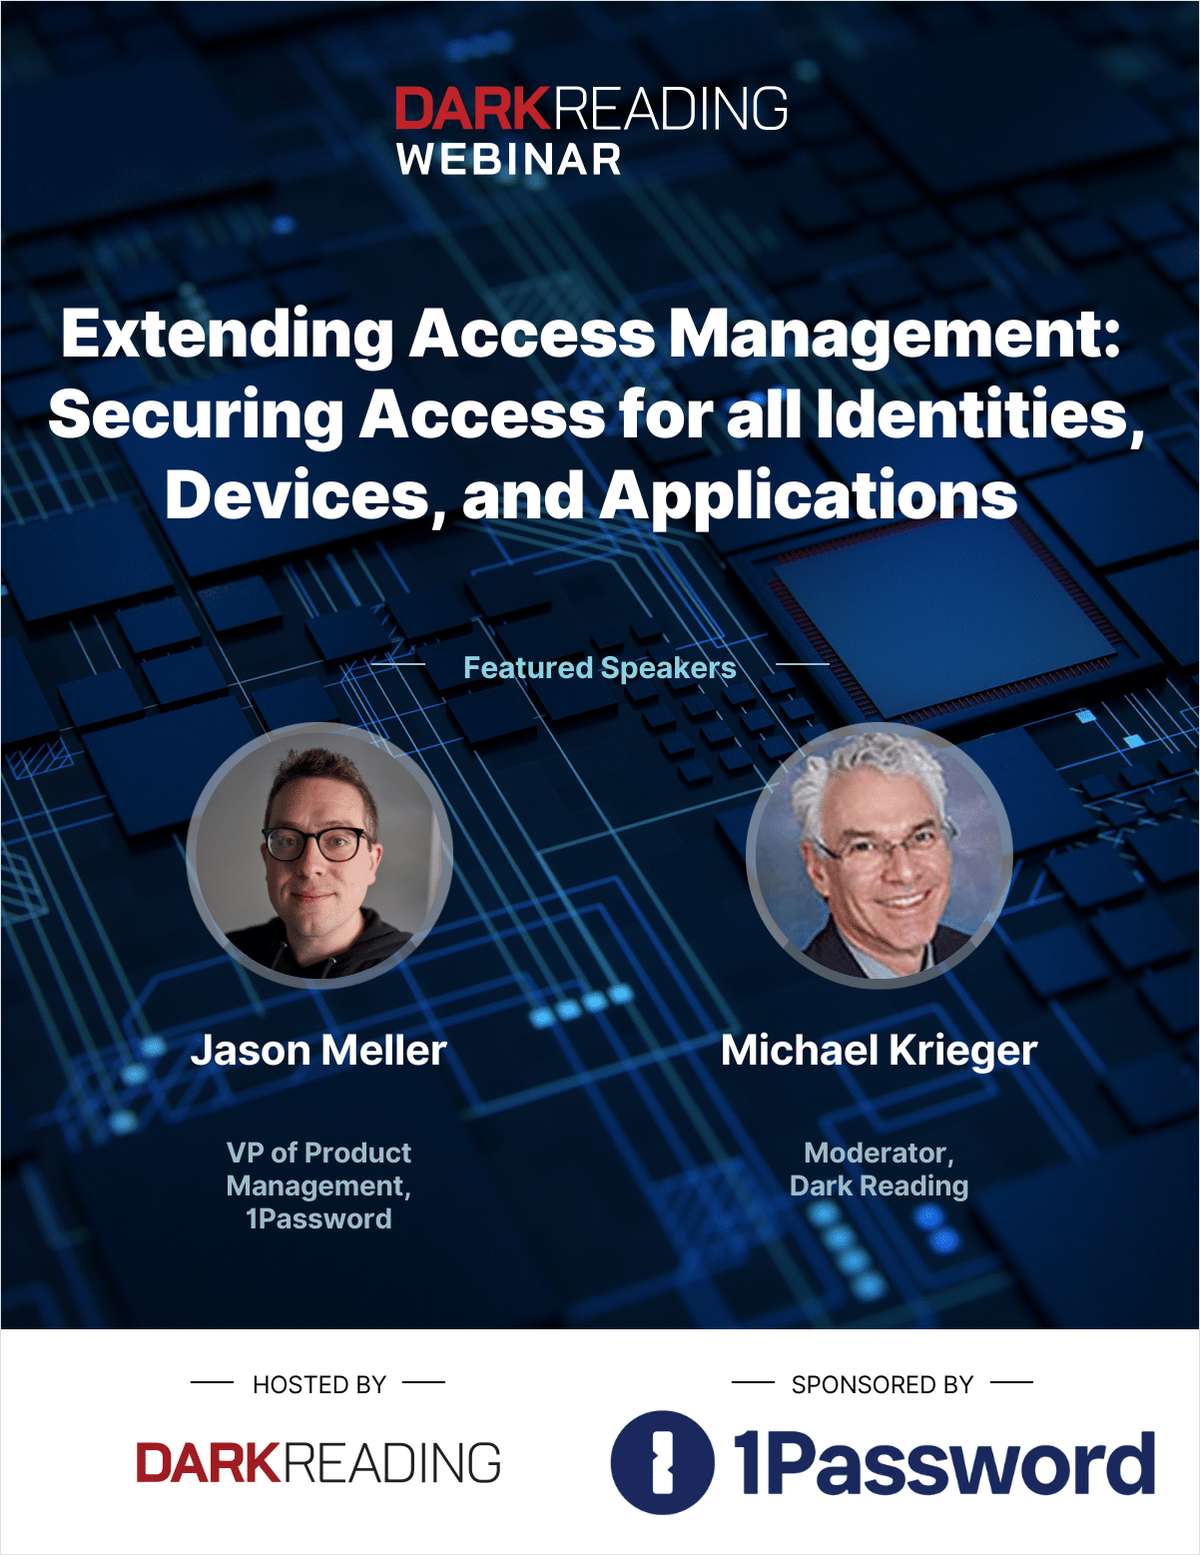 Extending Access Management:  Securing Access for all Identities, Devices, and Applications